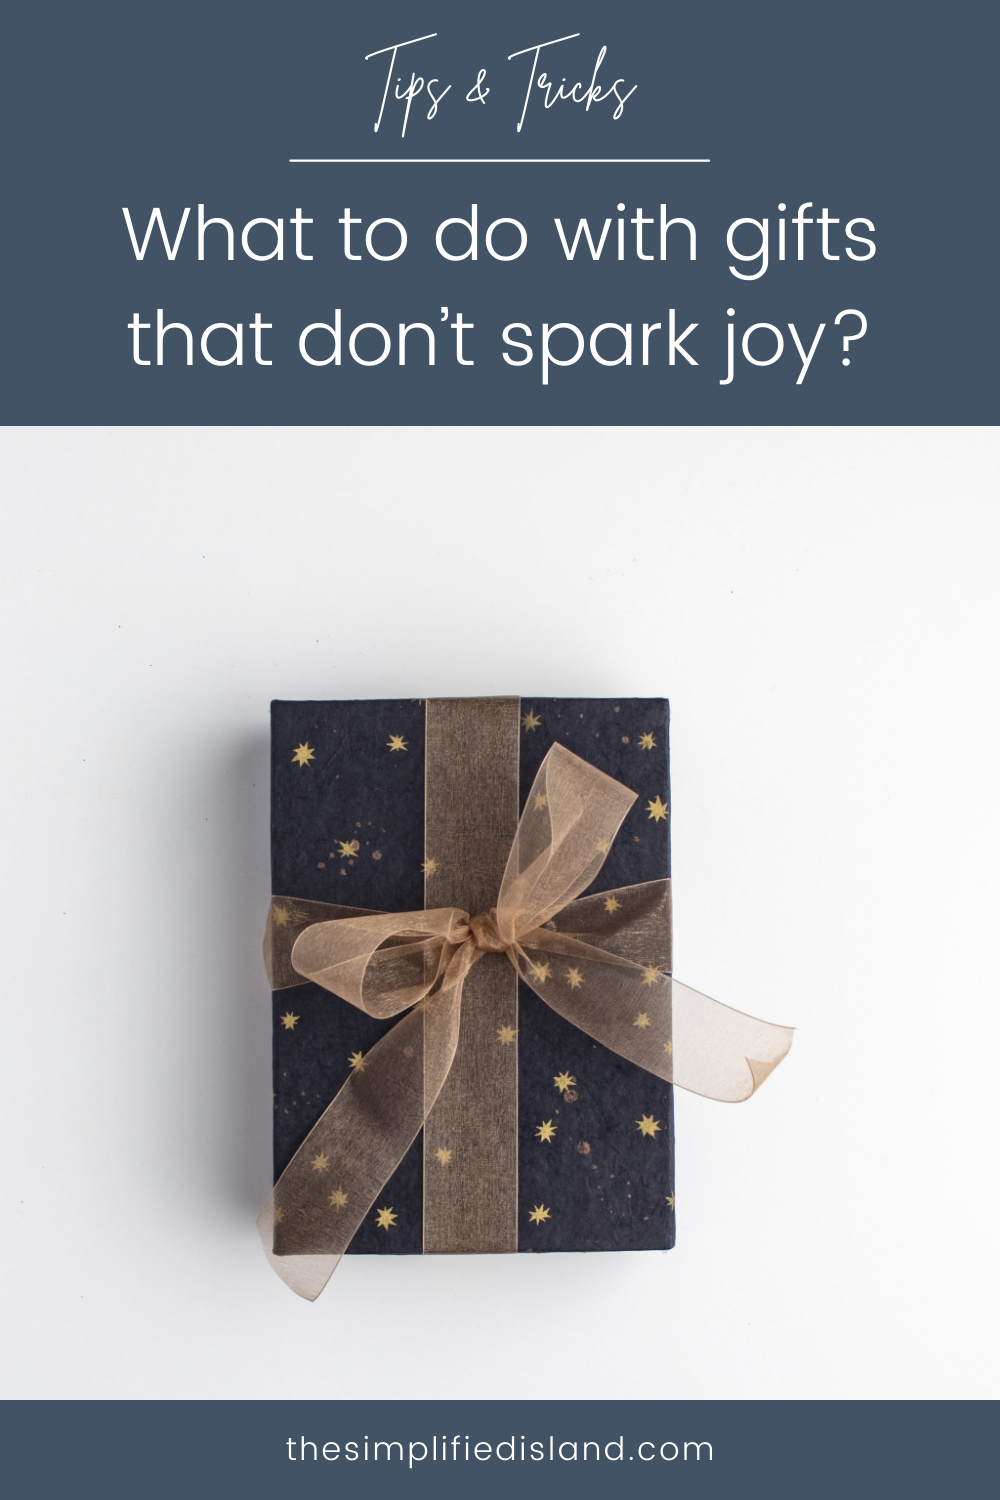 What to do with gifts that don't spark joy